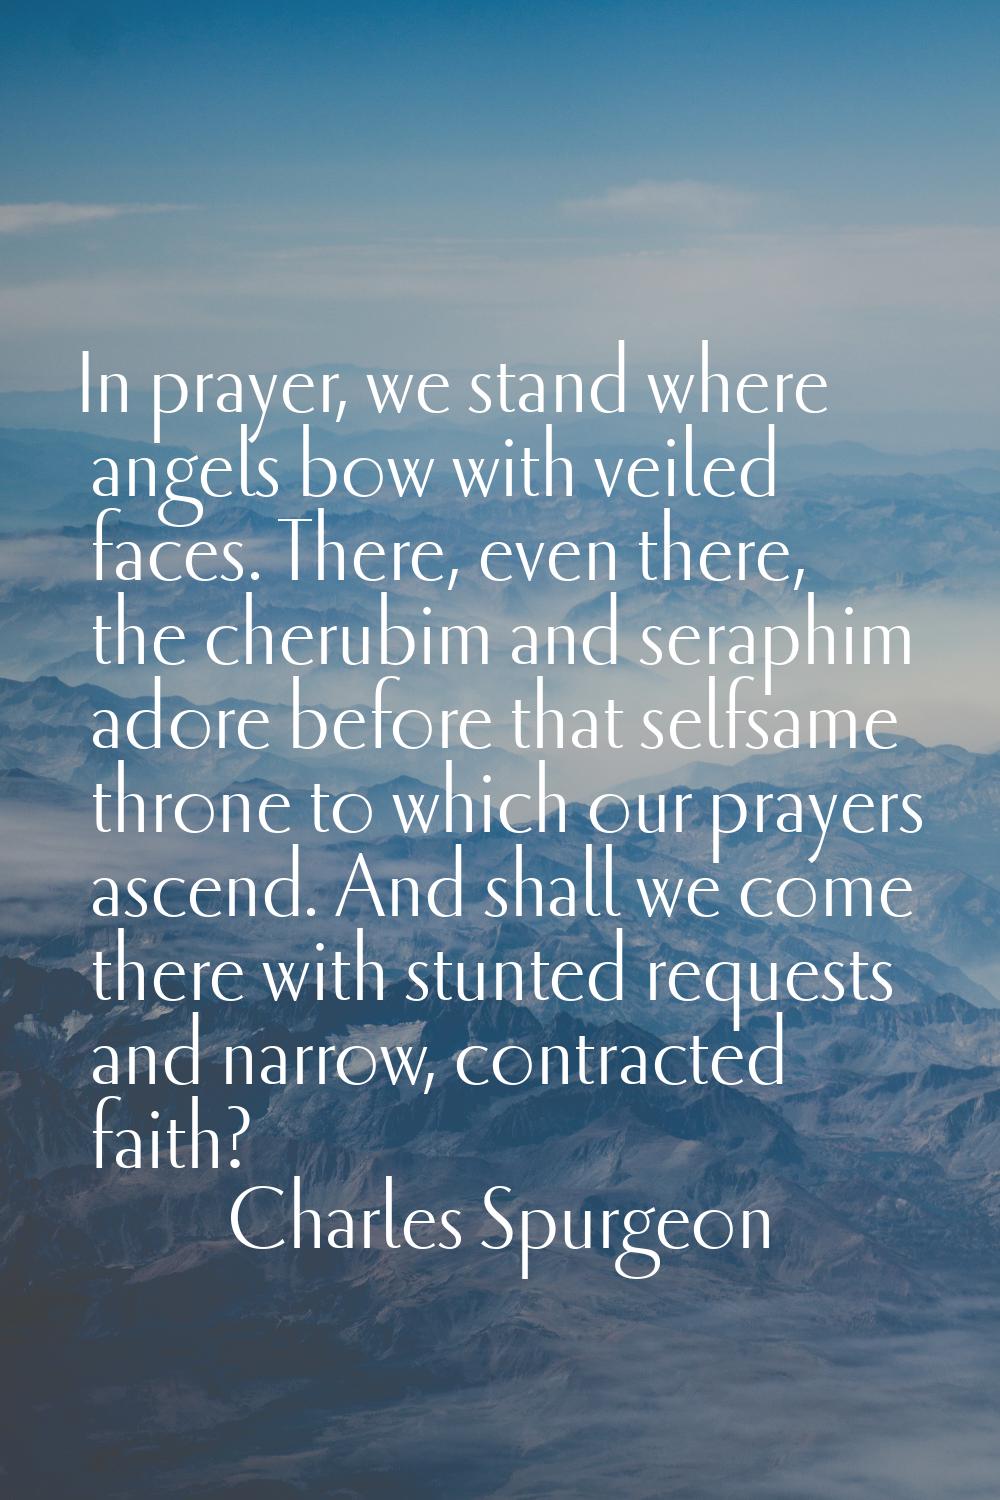 In prayer, we stand where angels bow with veiled faces. There, even there, the cherubim and seraphi